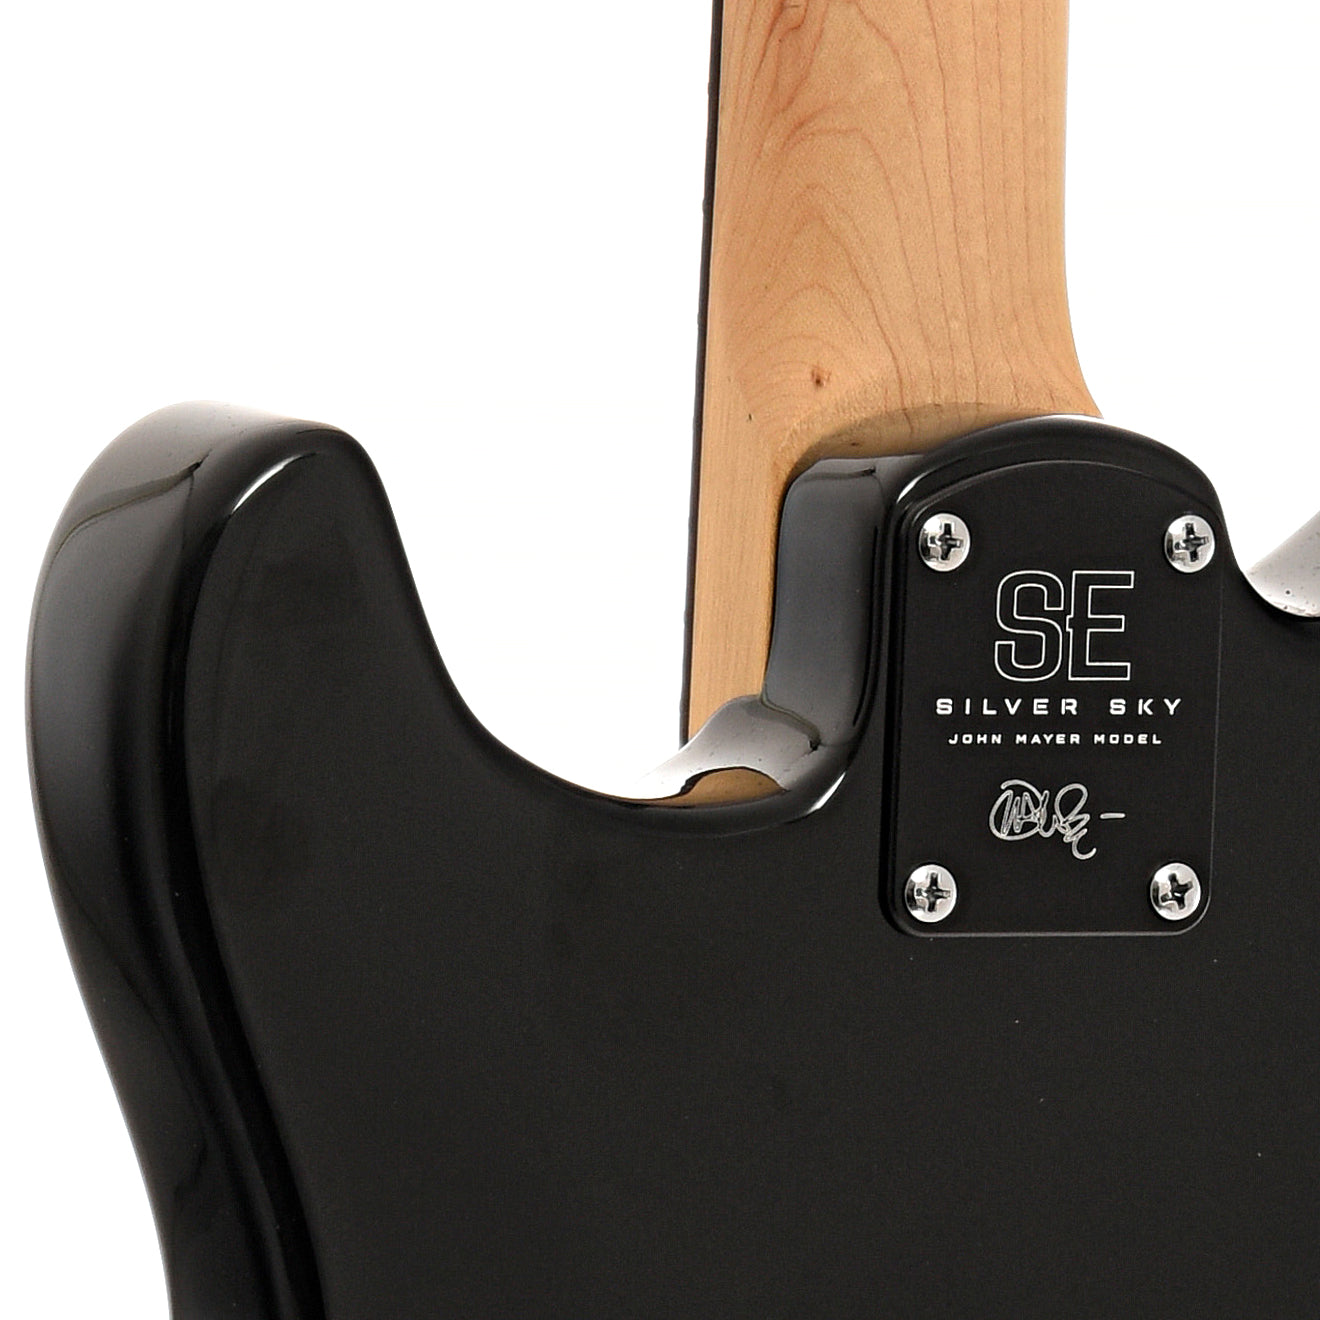 Neck joint of PRS SE Silver Sky Electric Guitar, Piano Black